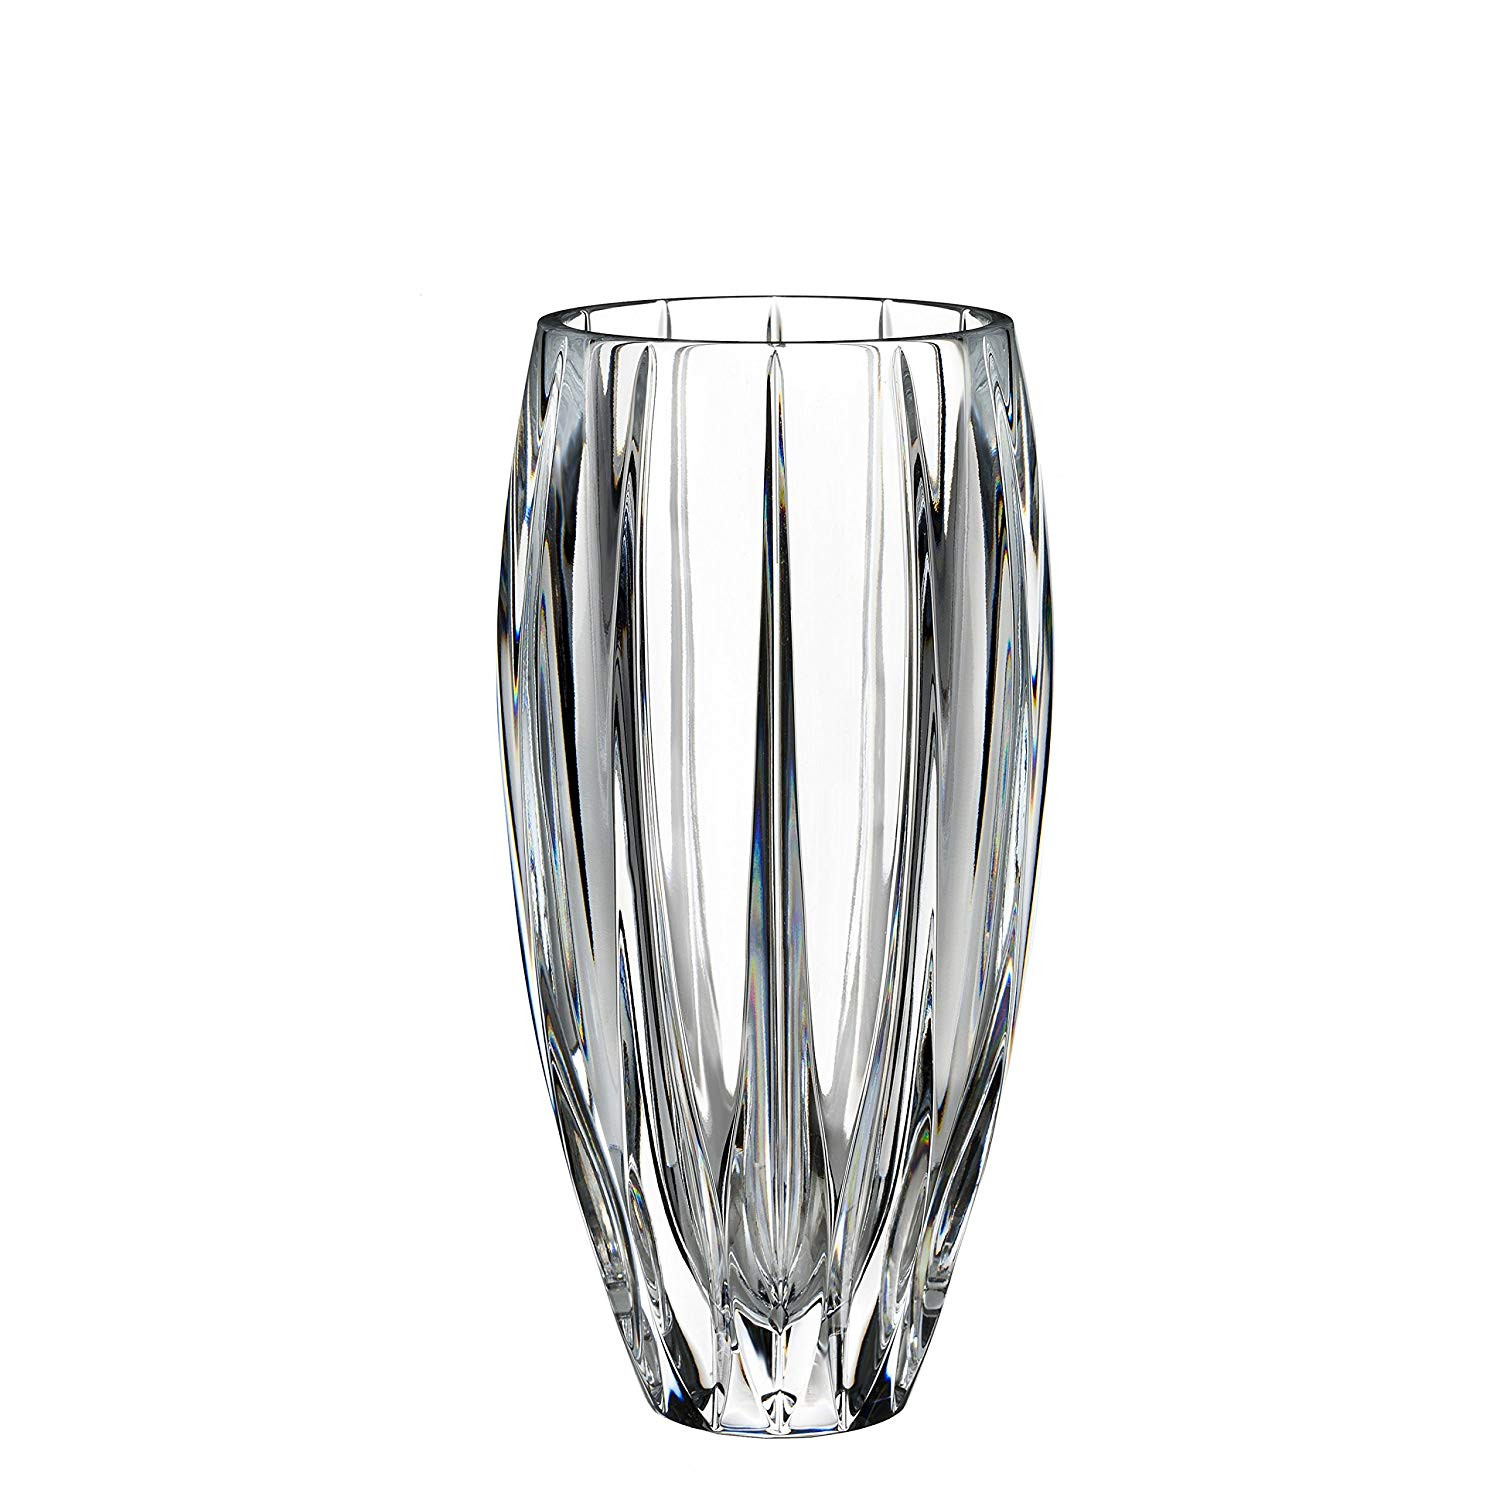 20 attractive Mikasa Florale Crystal Vase 2022 free download mikasa florale crystal vase of amazon com marquis by waterford phoenix vase 11 home kitchen intended for 81hkbokyyfl sl1500